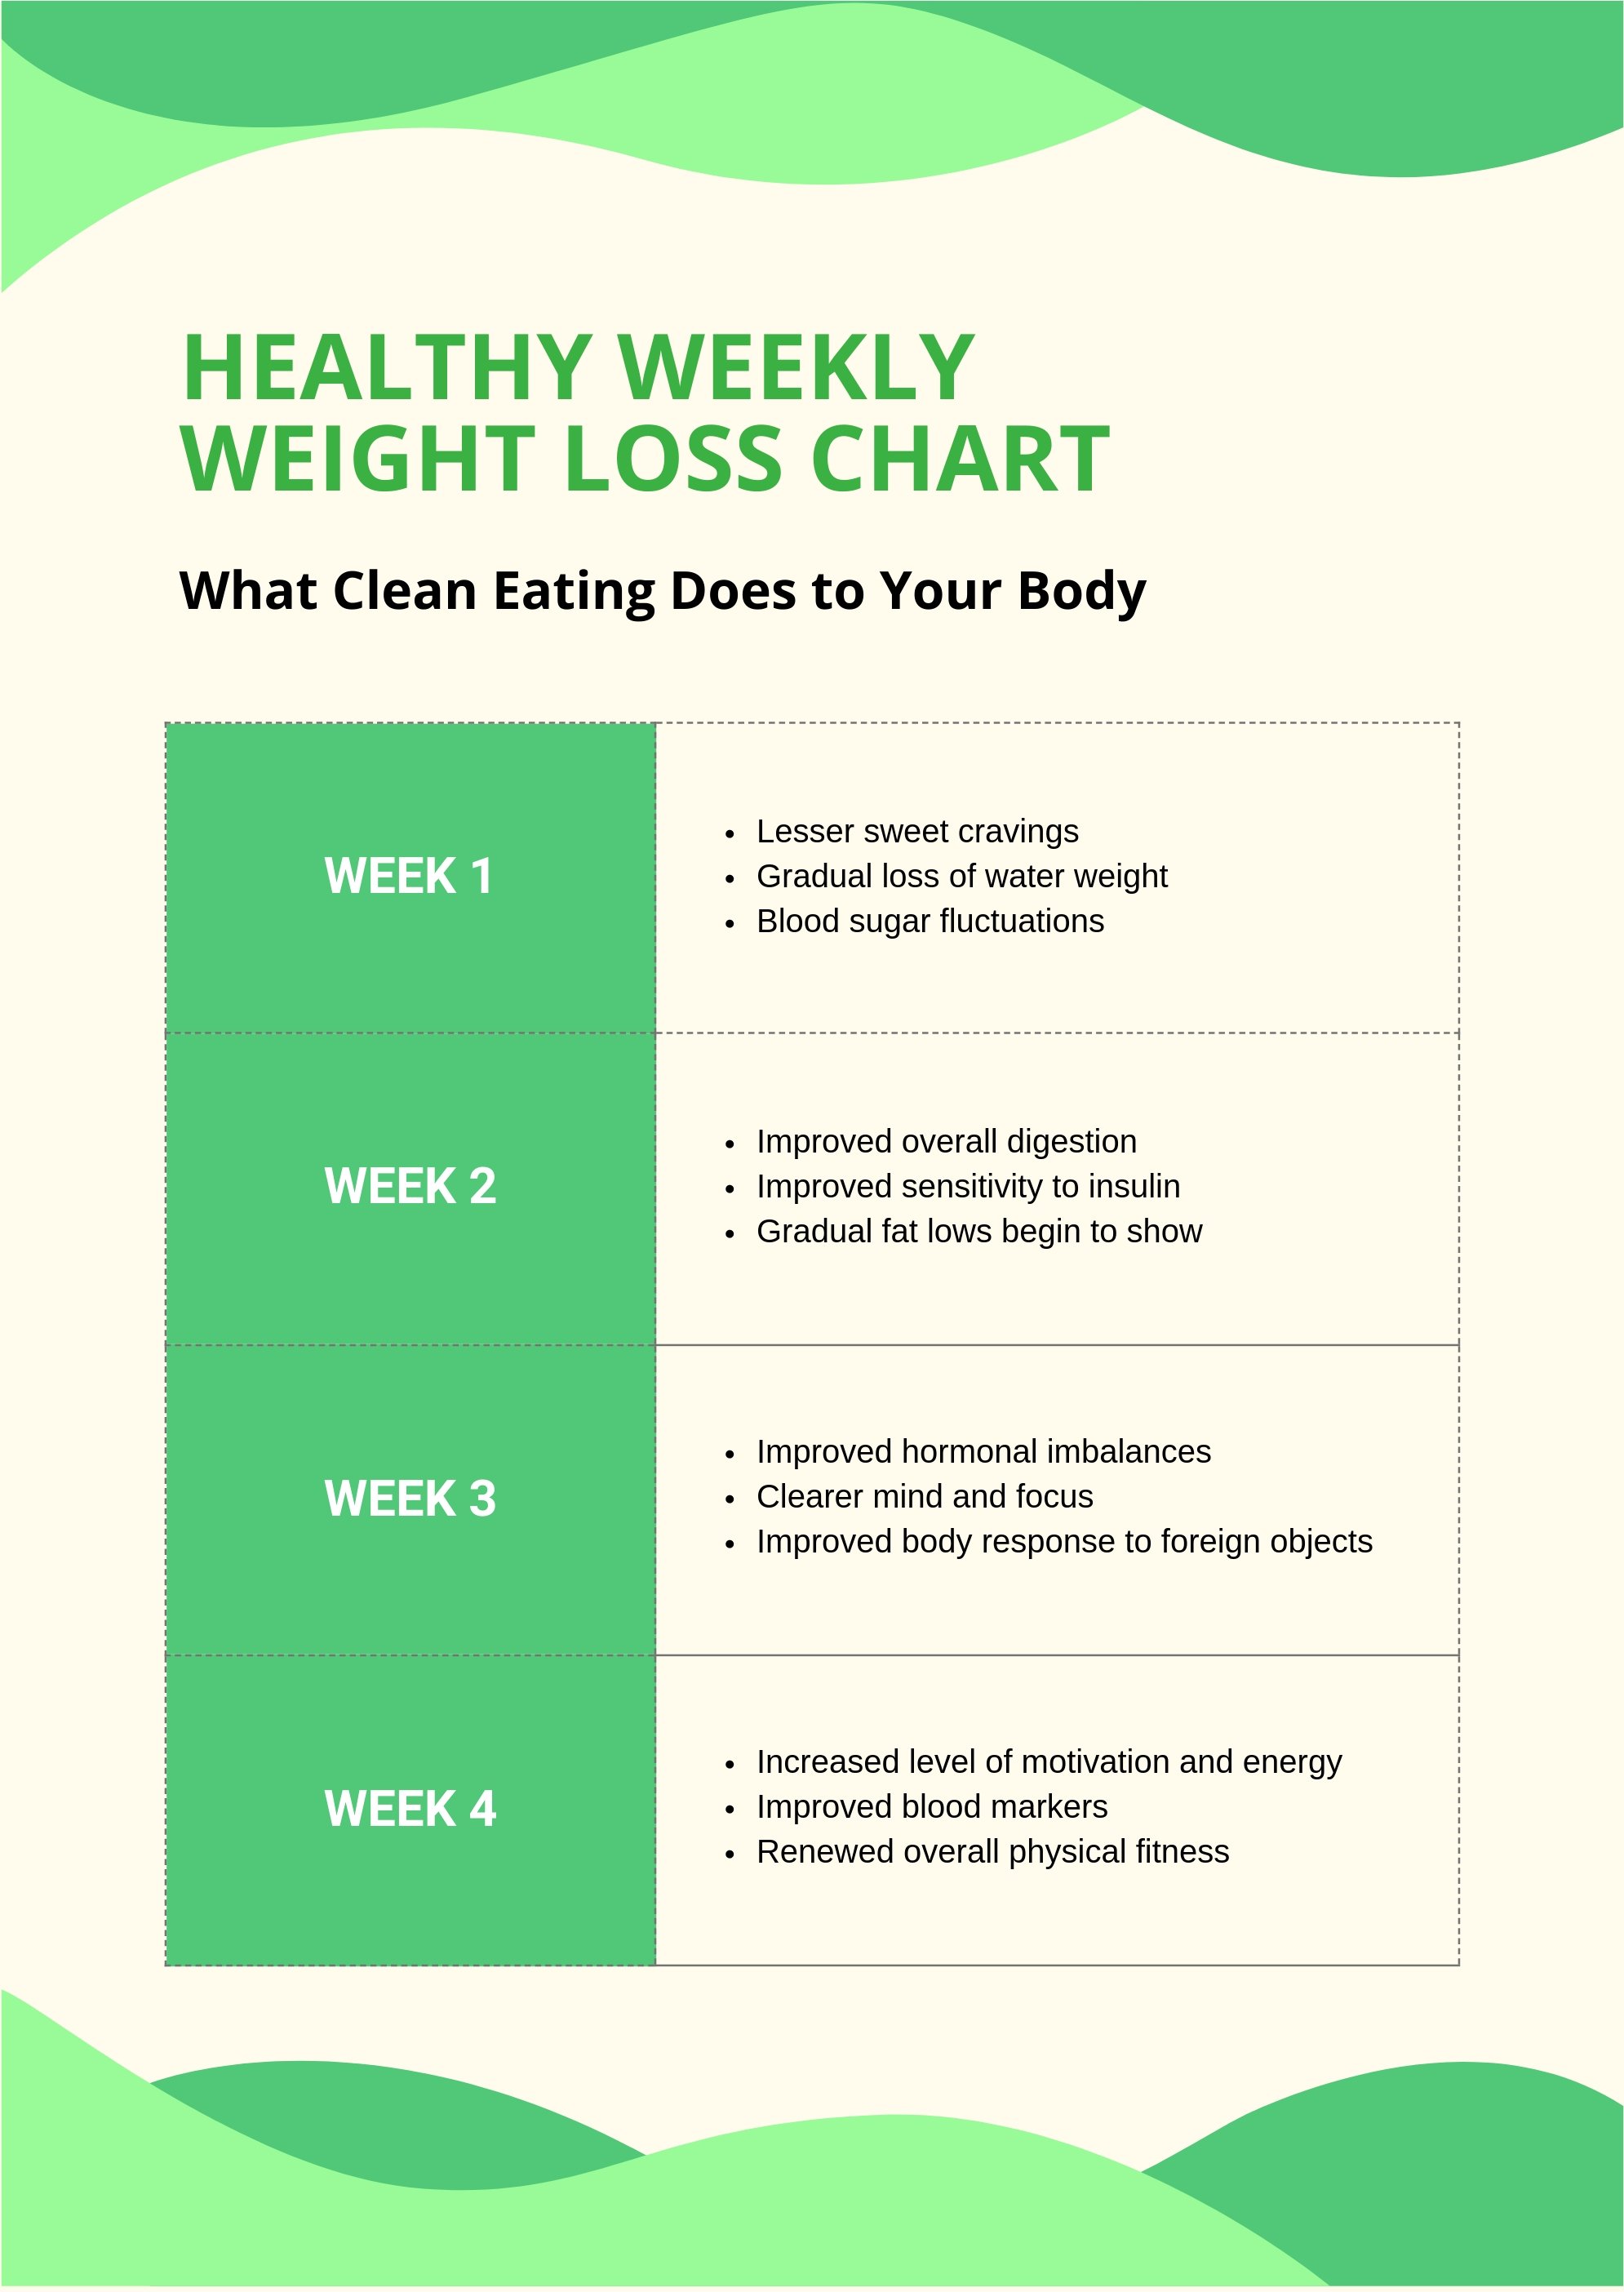 Healthy Weekly Weight Loss Chart